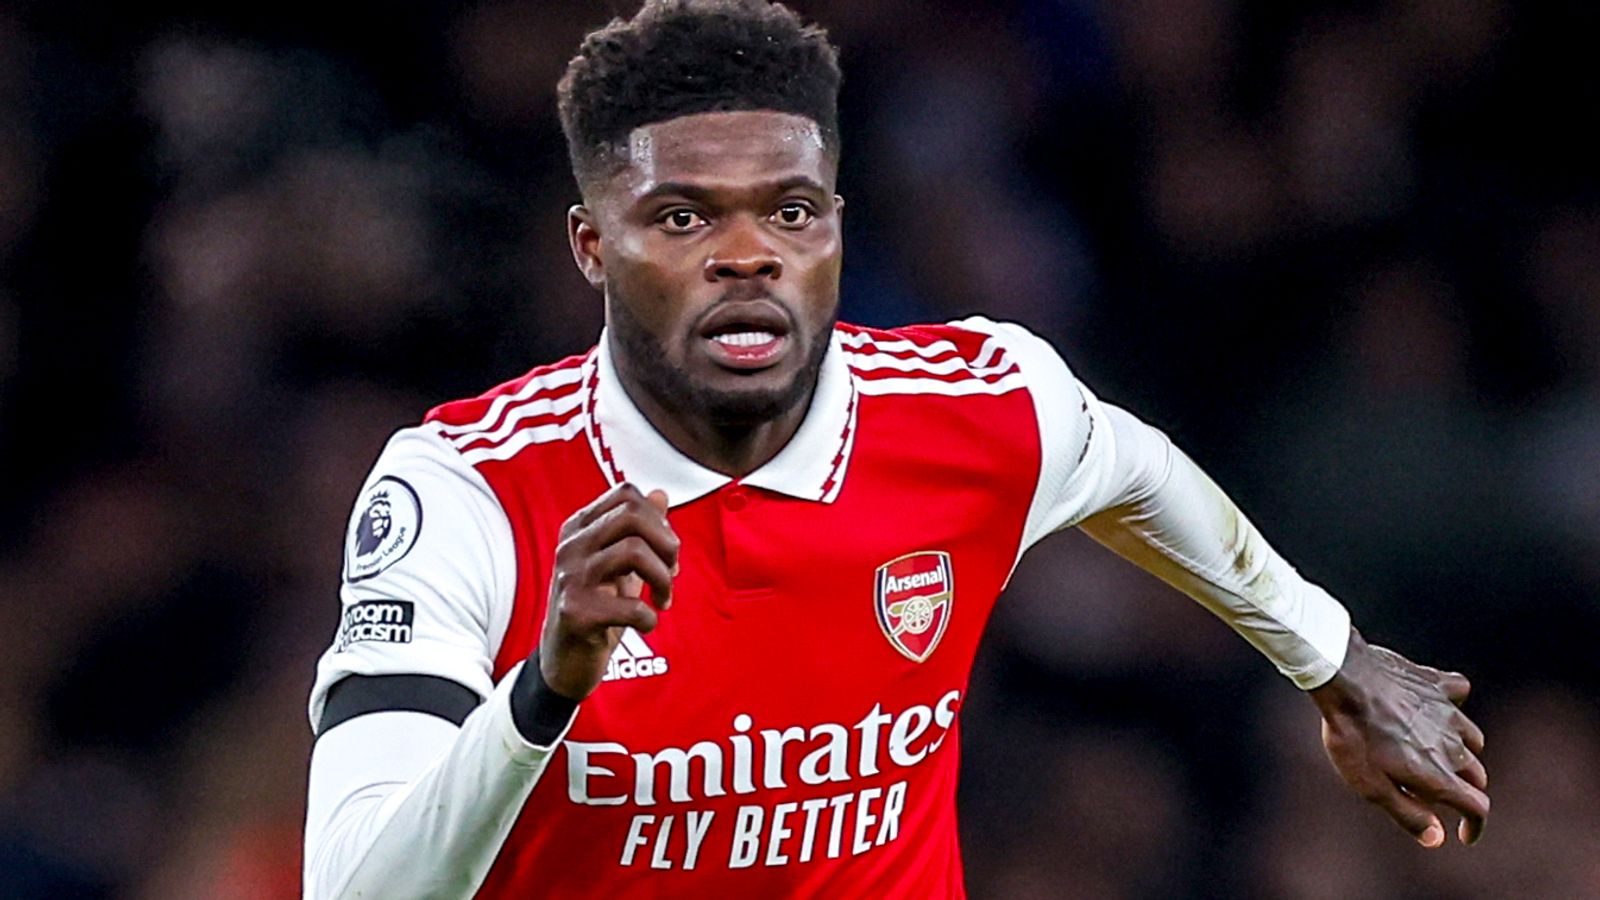 Arsenal’s midfielder, Thomas Partey, is set to leave the club at the end of the season